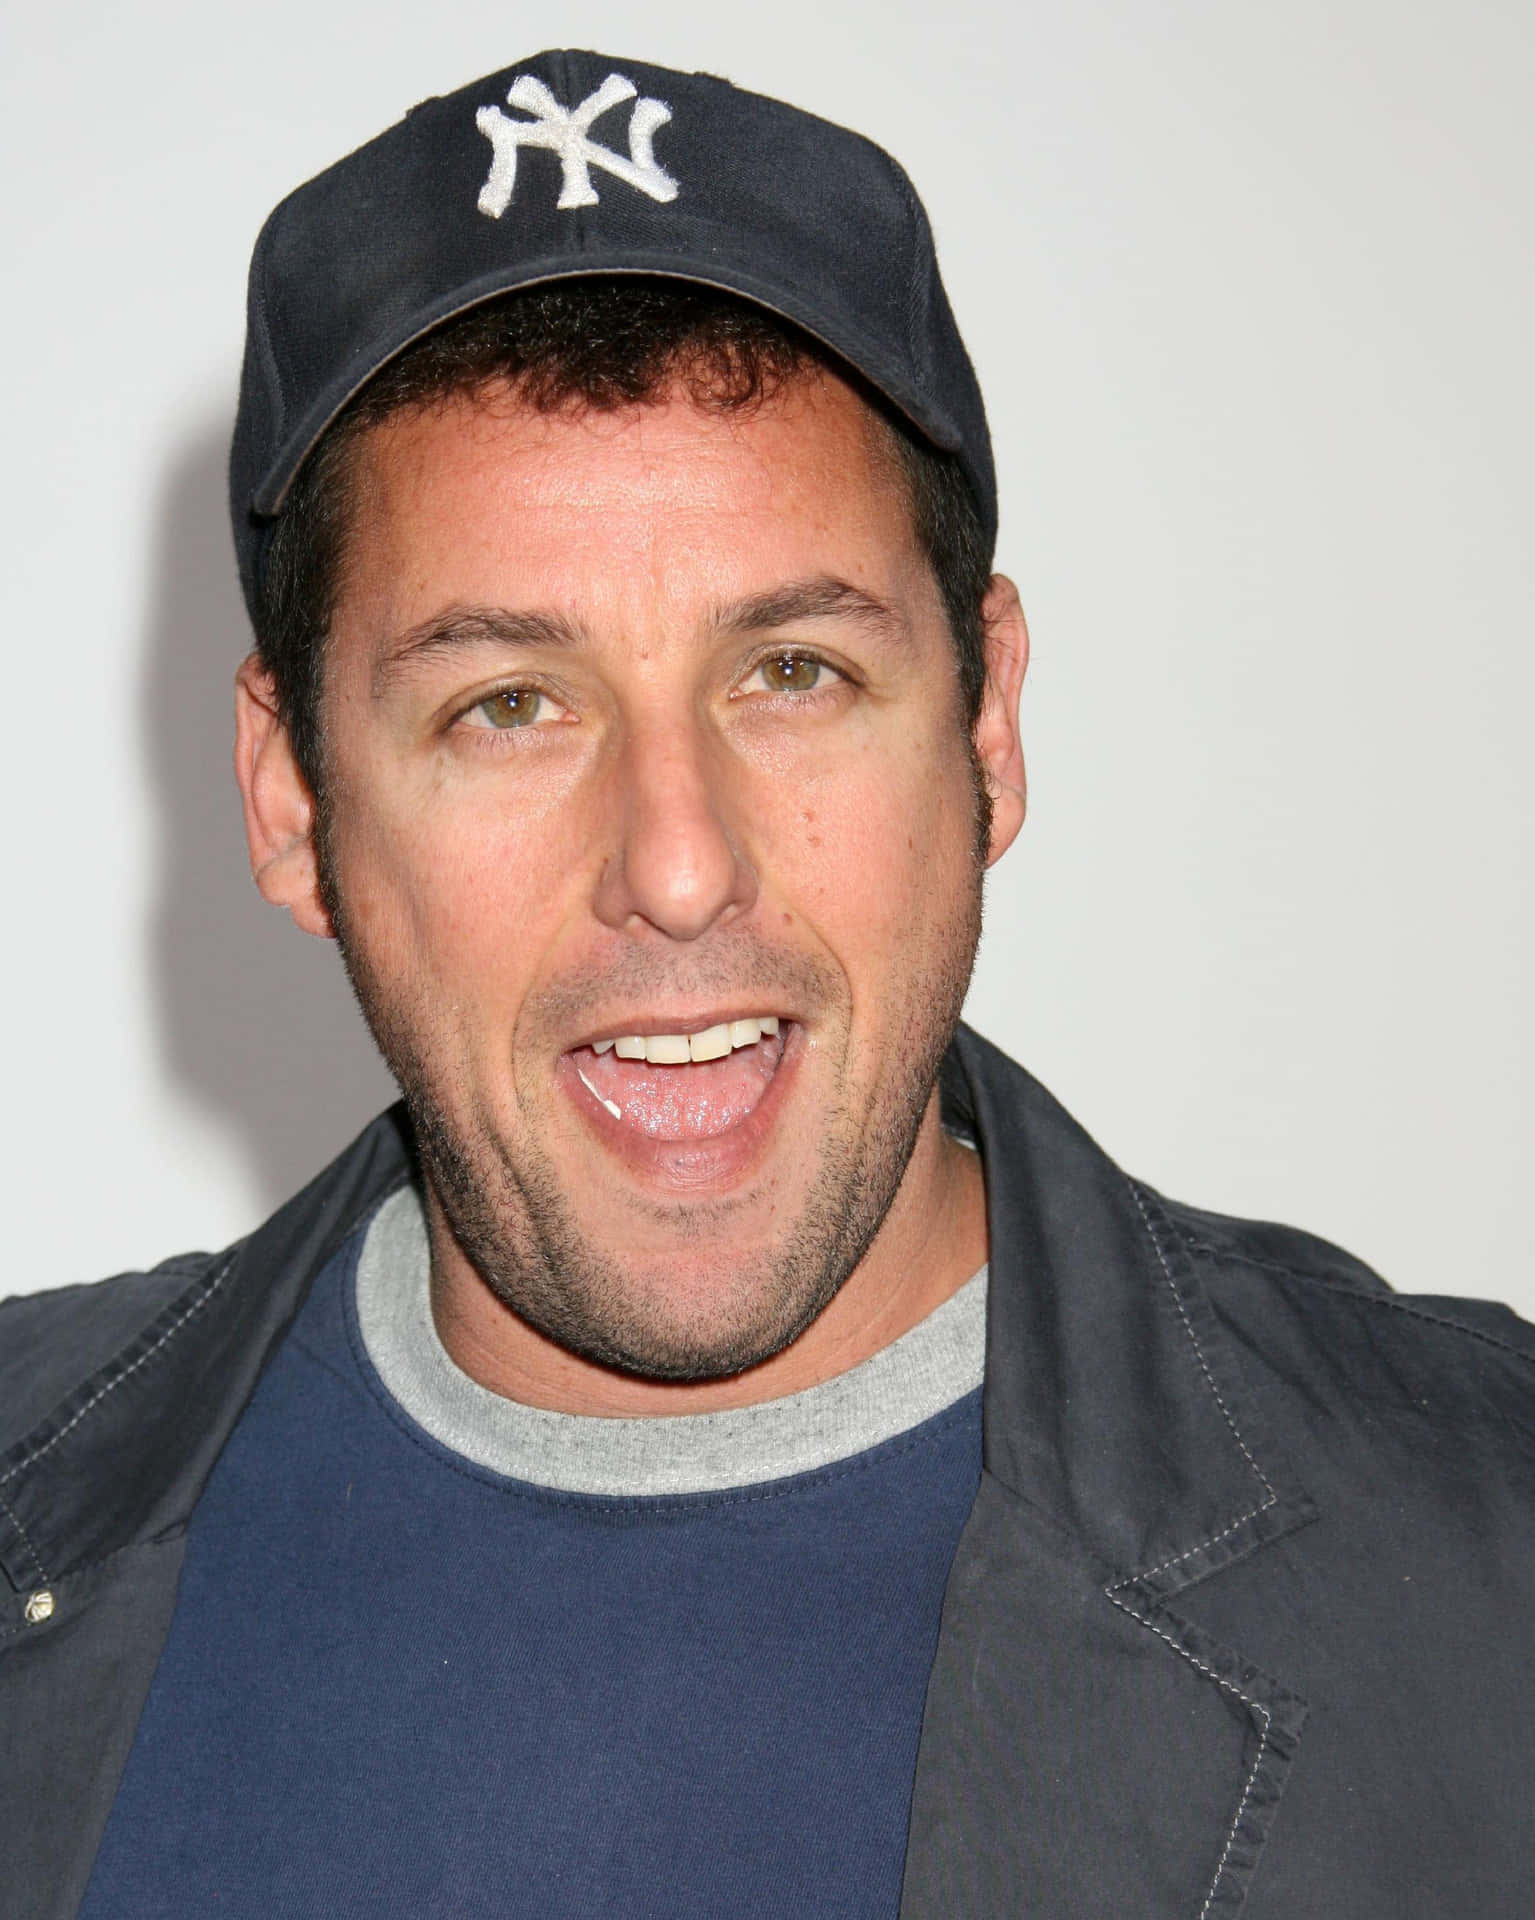 Adam Sandler Appearing in a Recent Movie